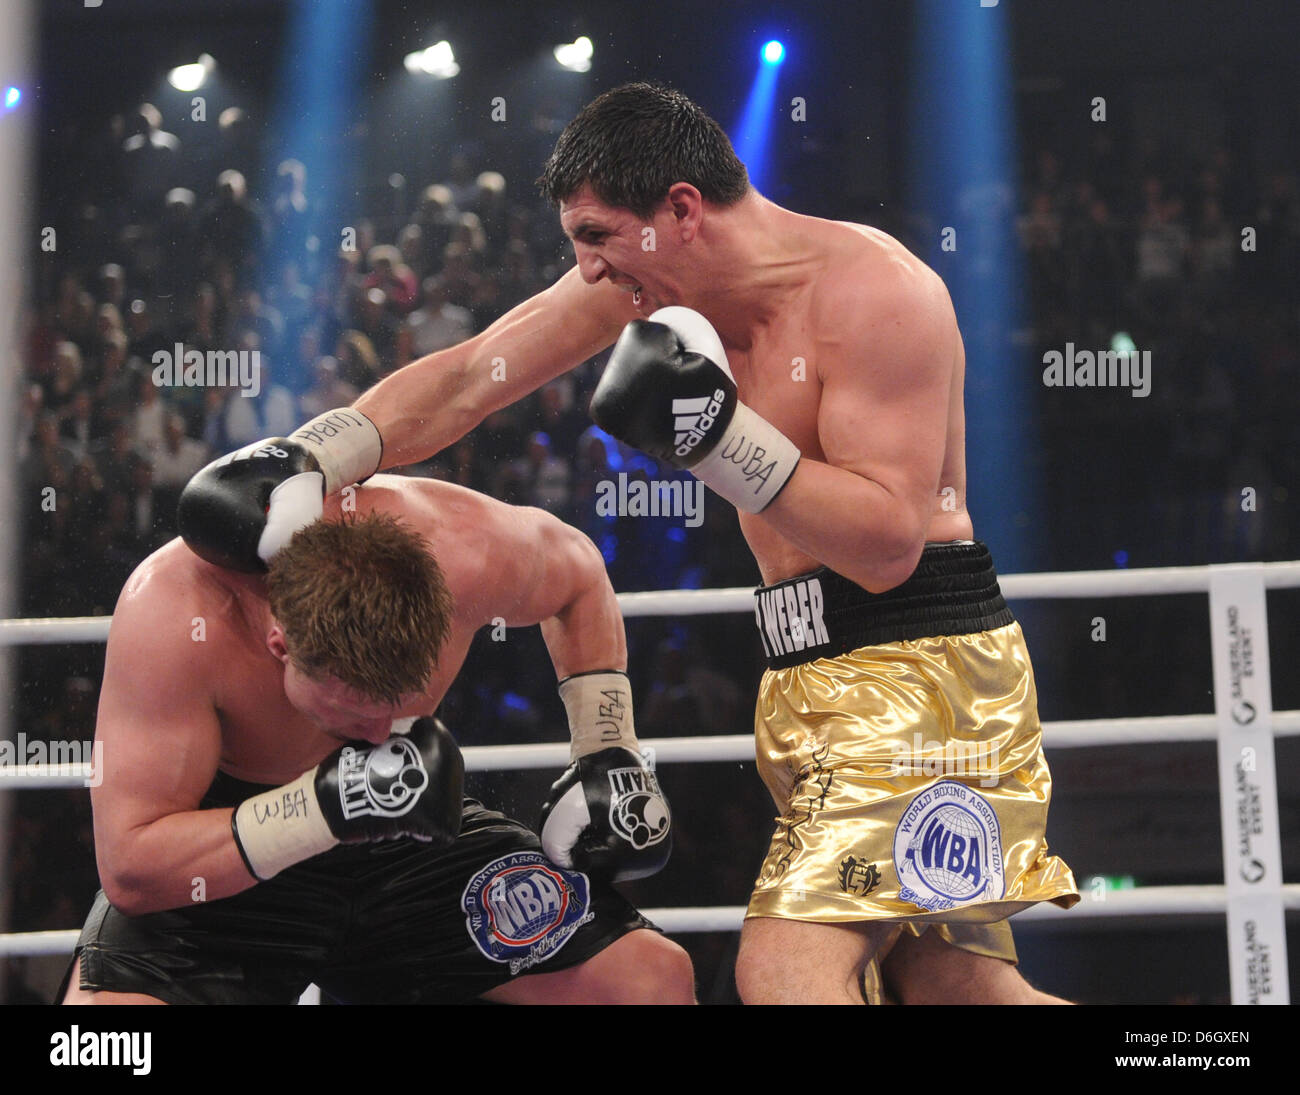 German boxer Marco Huck (R) fights against Russian boxer Alexander Povetkin  during the WBA world heavyweight